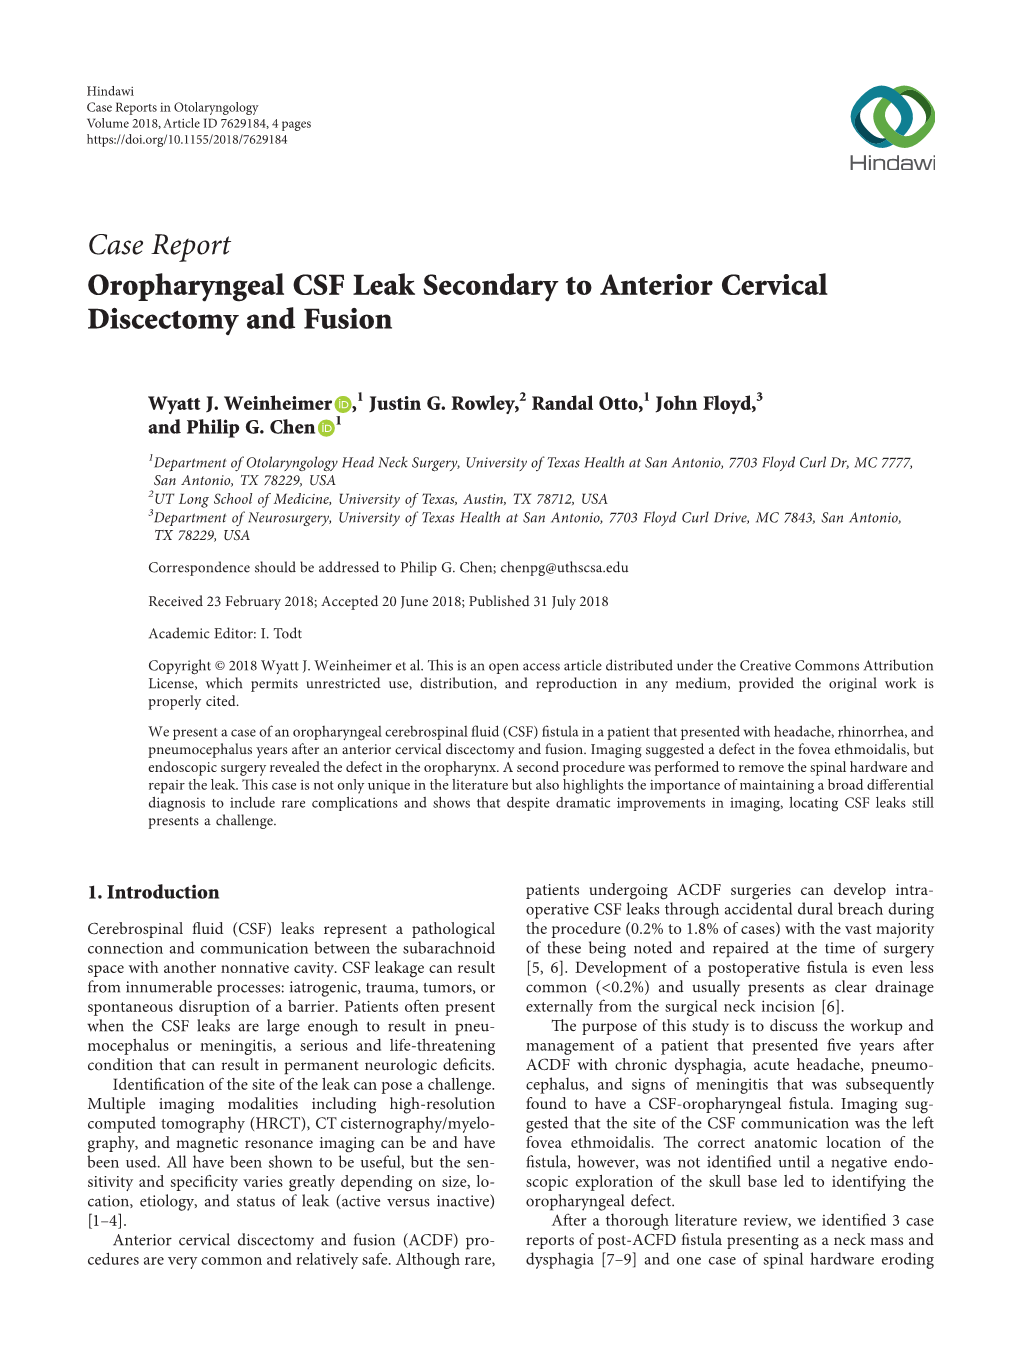 Oropharyngeal CSF Leak Secondary to Anterior Cervical Discectomy and Fusion